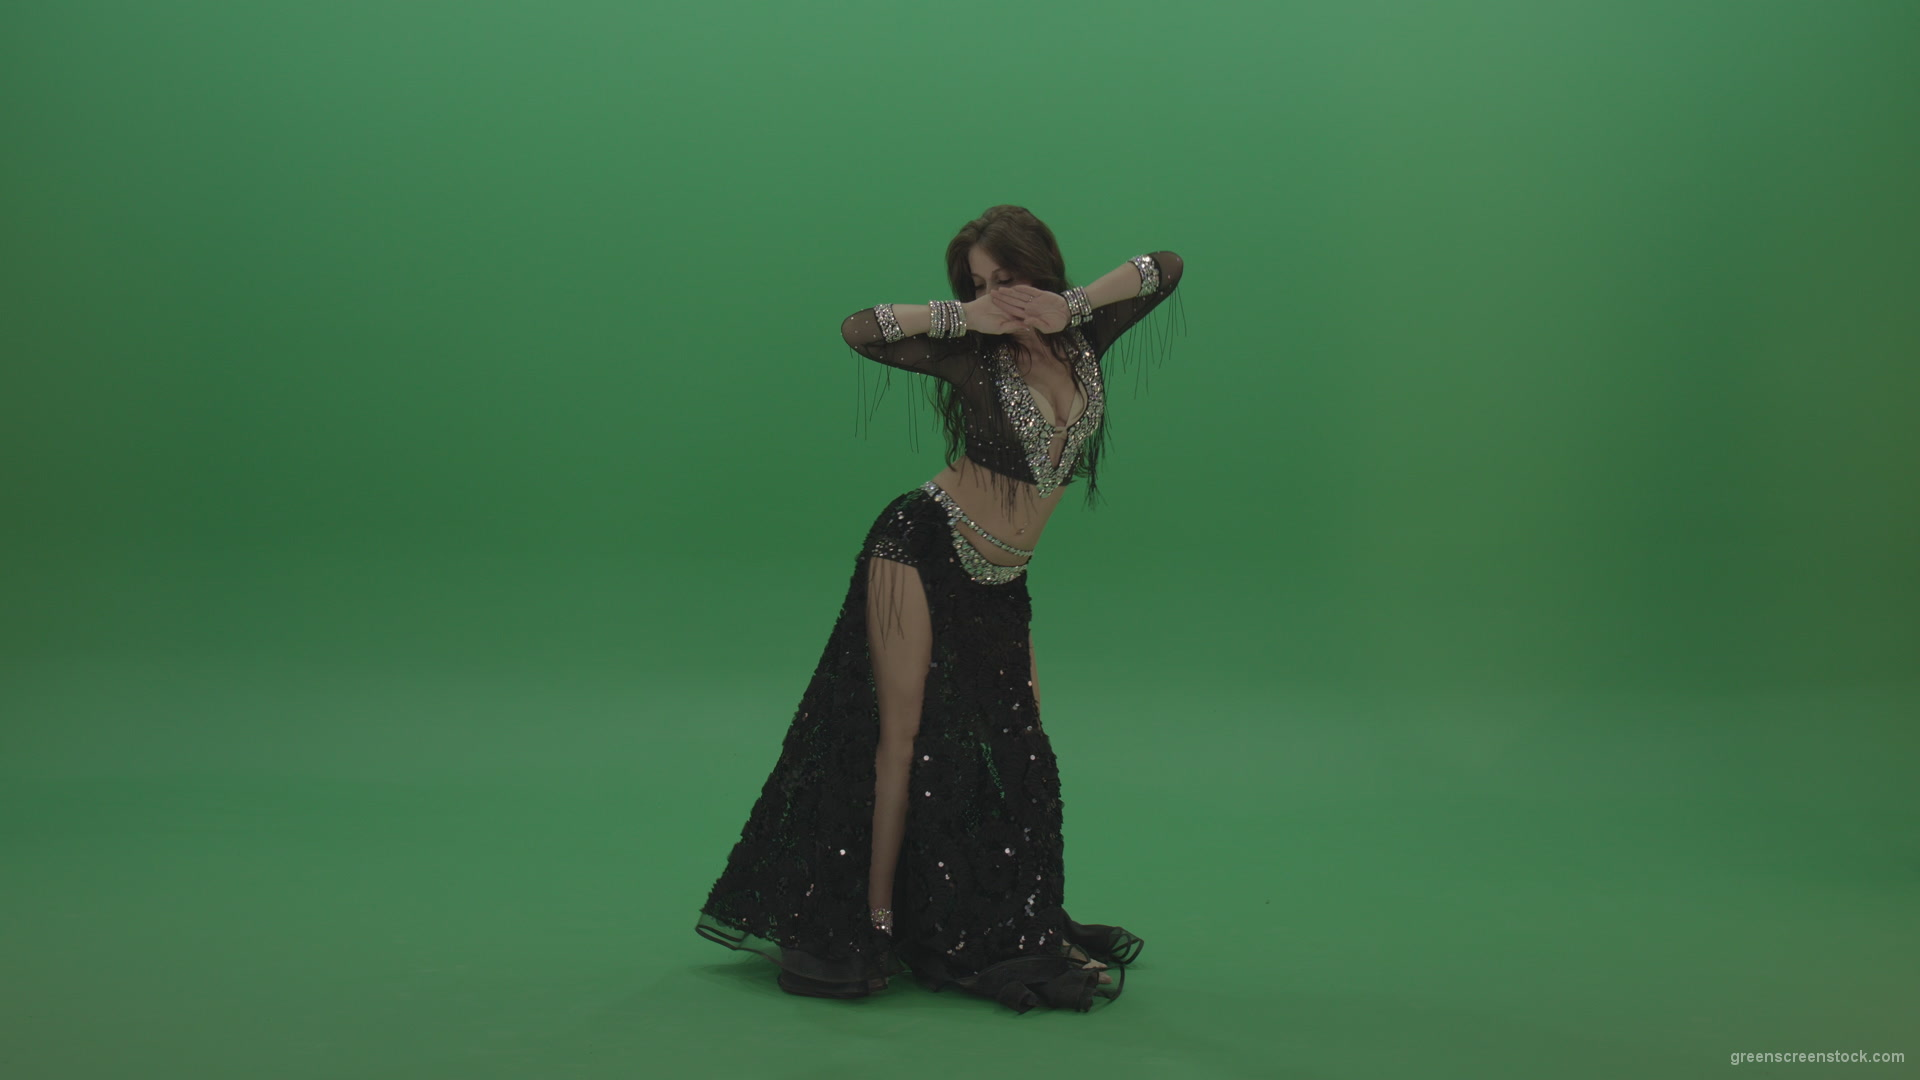 Admirable-belly-dancer-in-black-wear-display-amazing-dance-moves-over-chromakey-background_007 Green Screen Stock